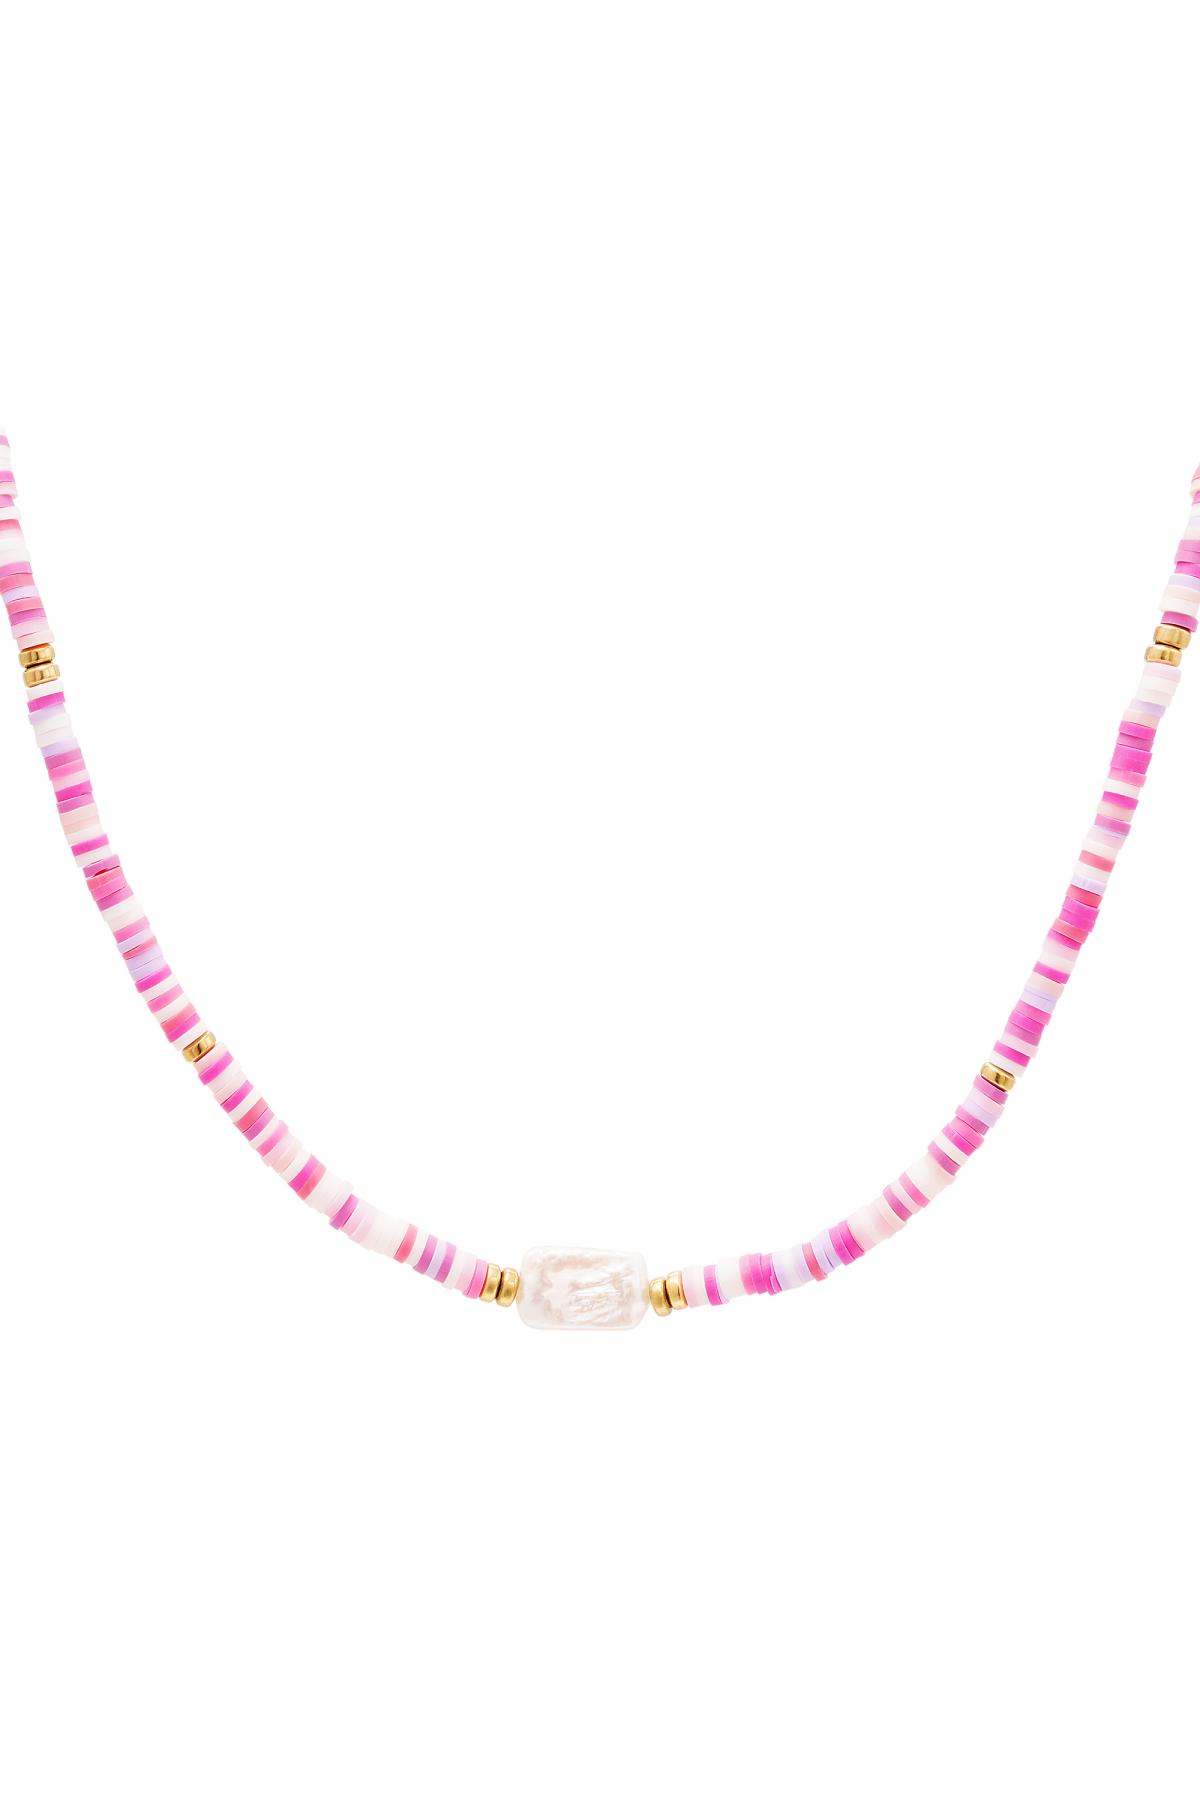 Colourful pearls necklace - #summergirls collection Rose polymer clay